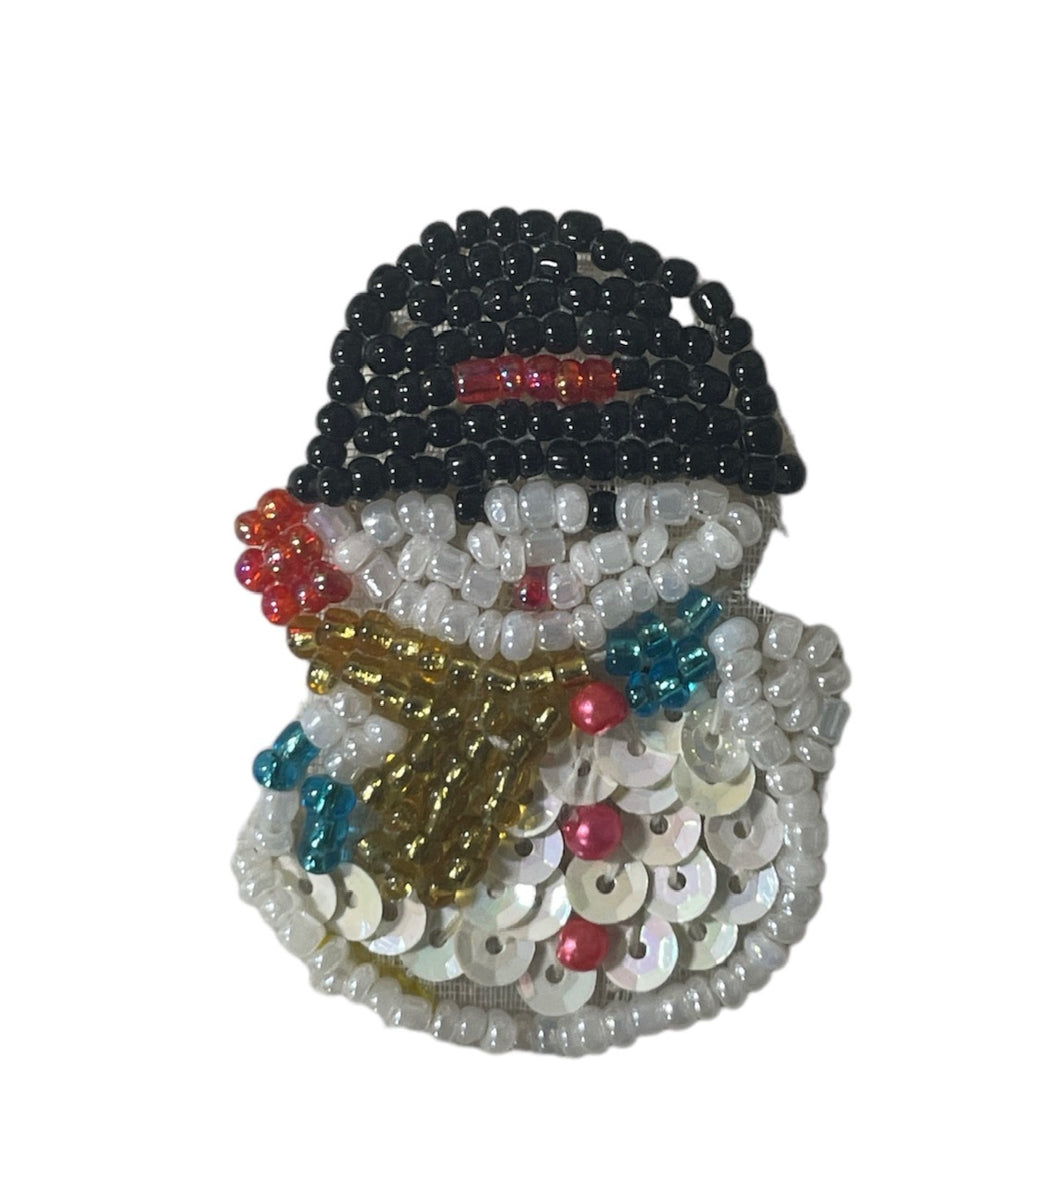 Snowman with White Sequins and Multi-Colored Beads 1.5